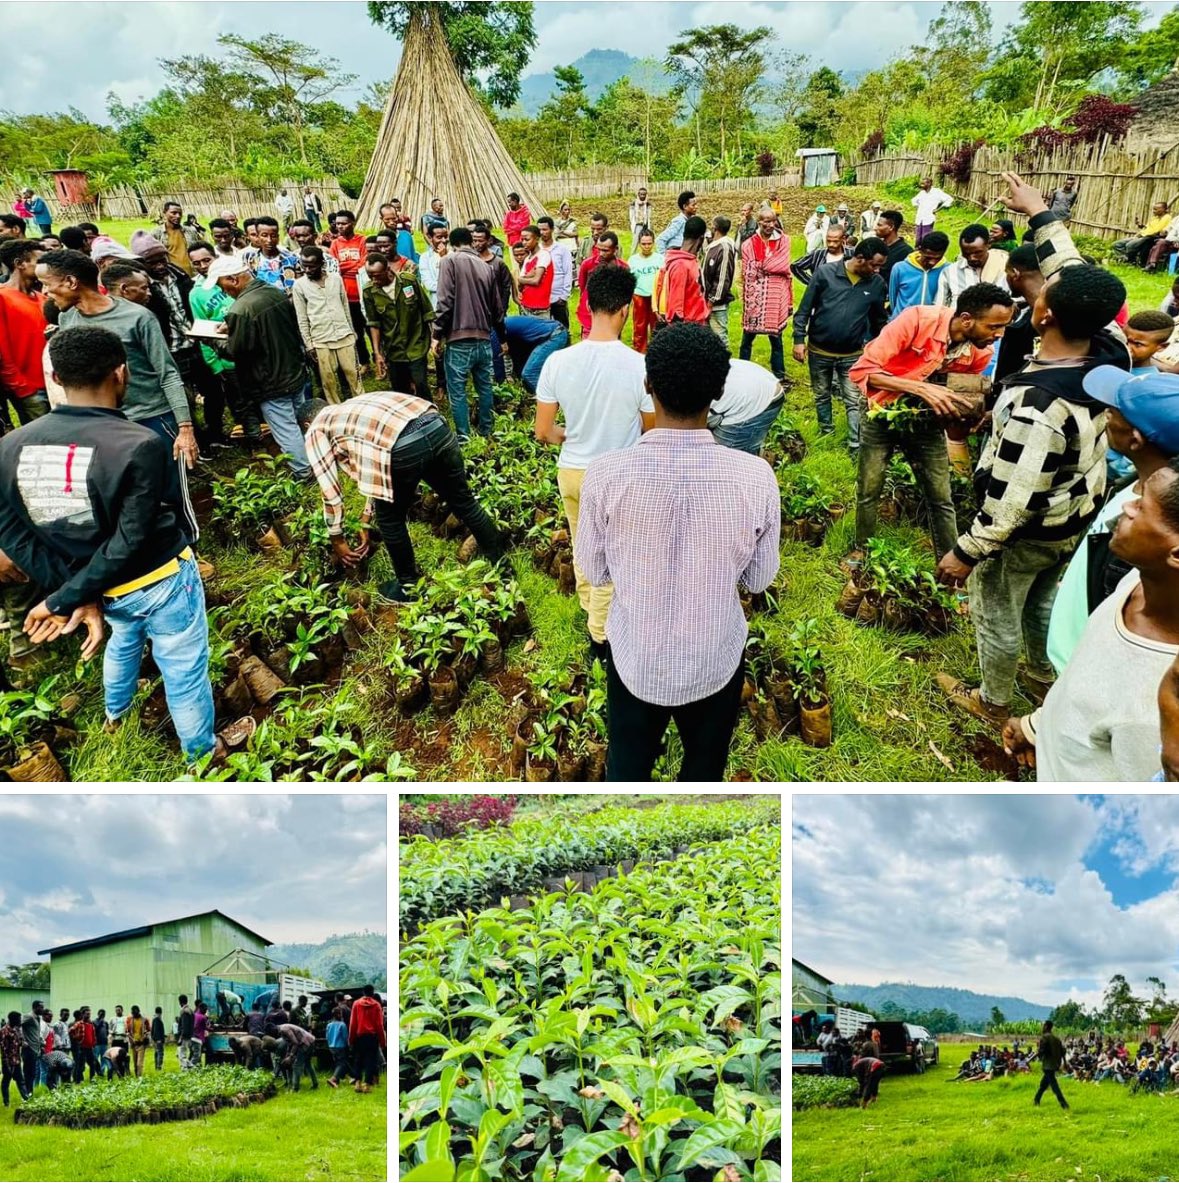 Bensa Sidama Ethiopia 🌱🌱 “Today — The Ardent Coffee team in Bensa distributed 6,000 coffee seedlings to member farmers in Dembi area for free. Kudos to the team! 🌱” Ashenafi Argaw 🌱 #ArdentCoffee #Community #Unity